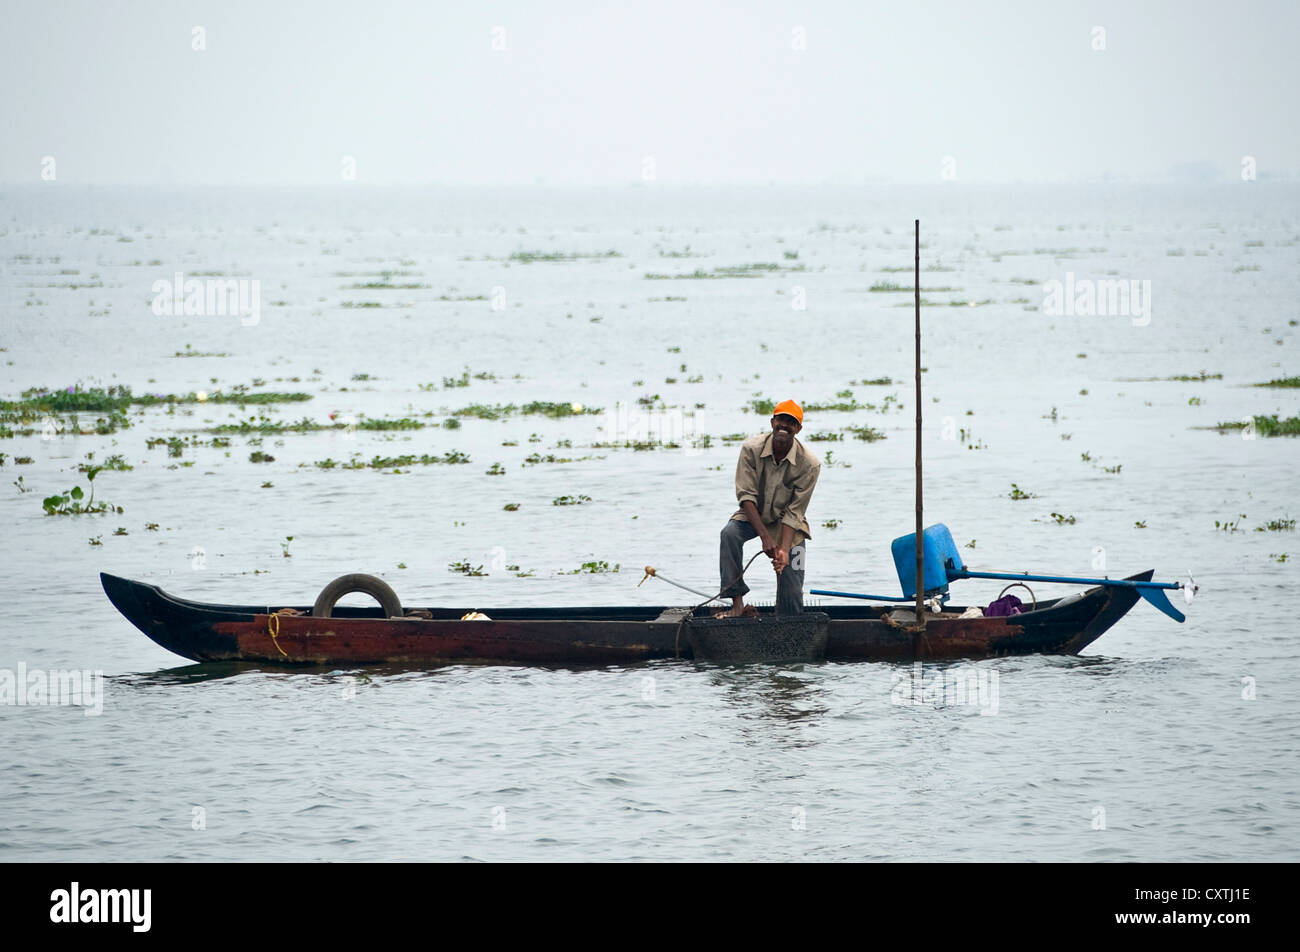 Horizontal view of a traditional fisherman in his fishing boat out on the backwaters of Kerala, fishing for mussels. Stock Photo